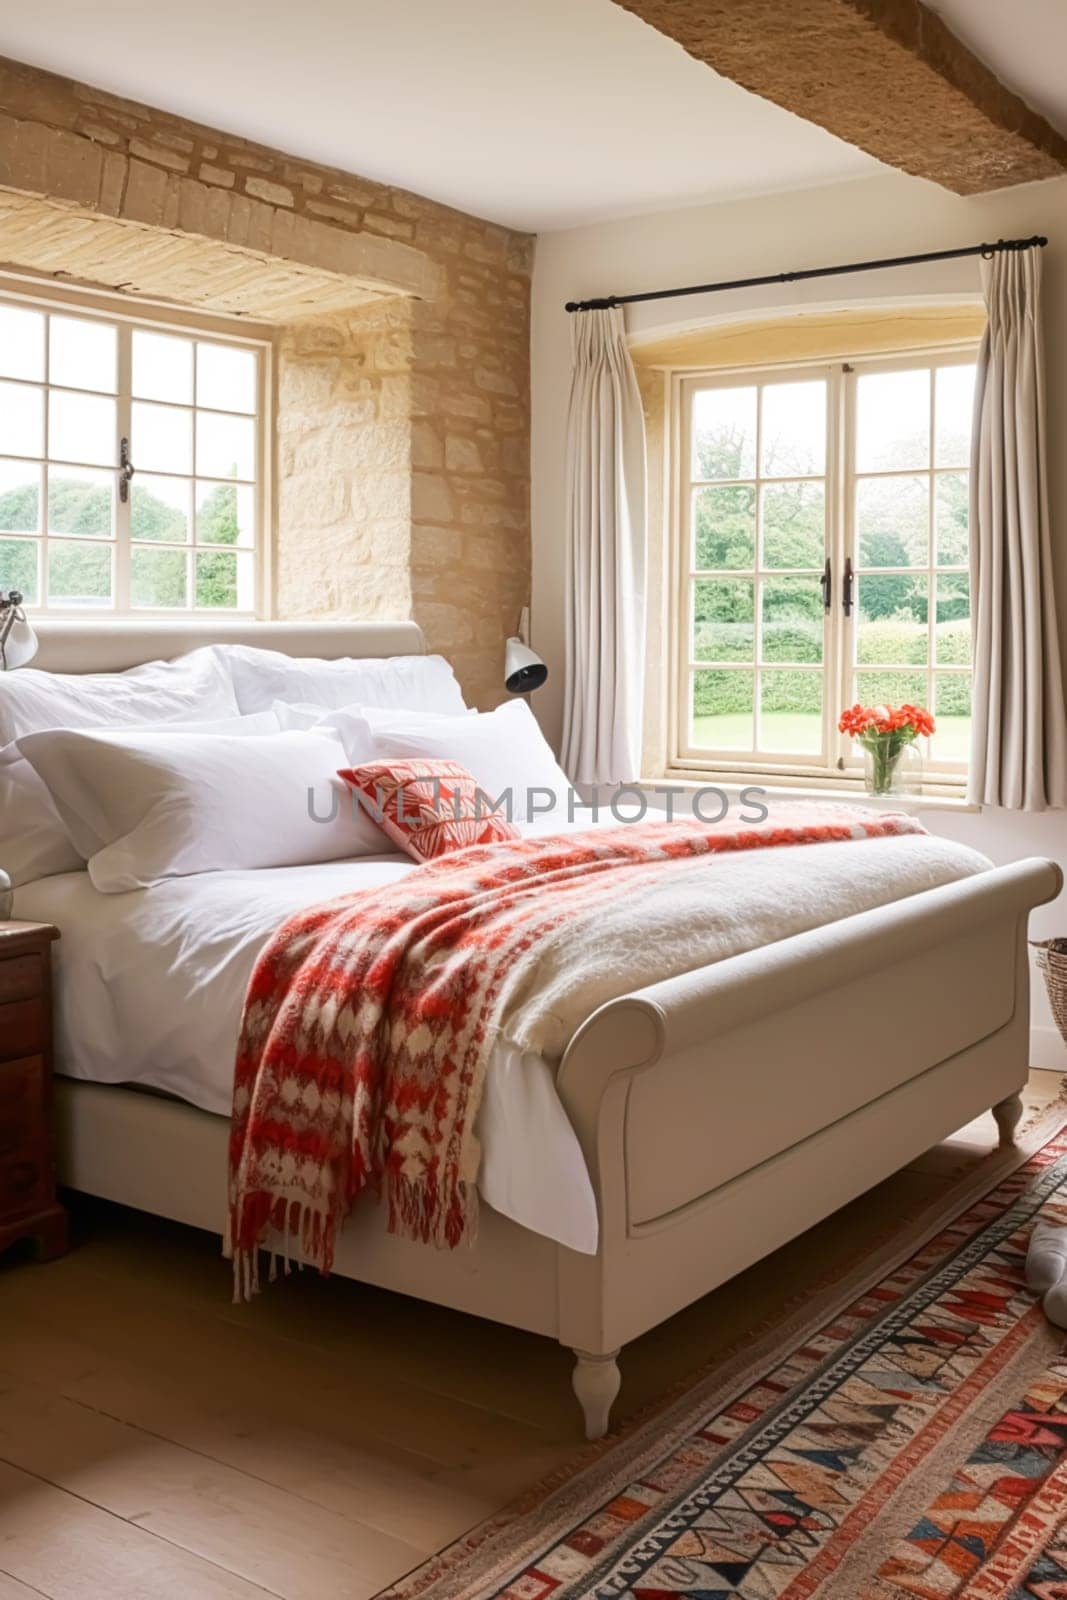 Cottage bedroom decor, interior design and holiday rental, bed with elegant bedding linen and antique furniture, English country house and farmhouse style idea